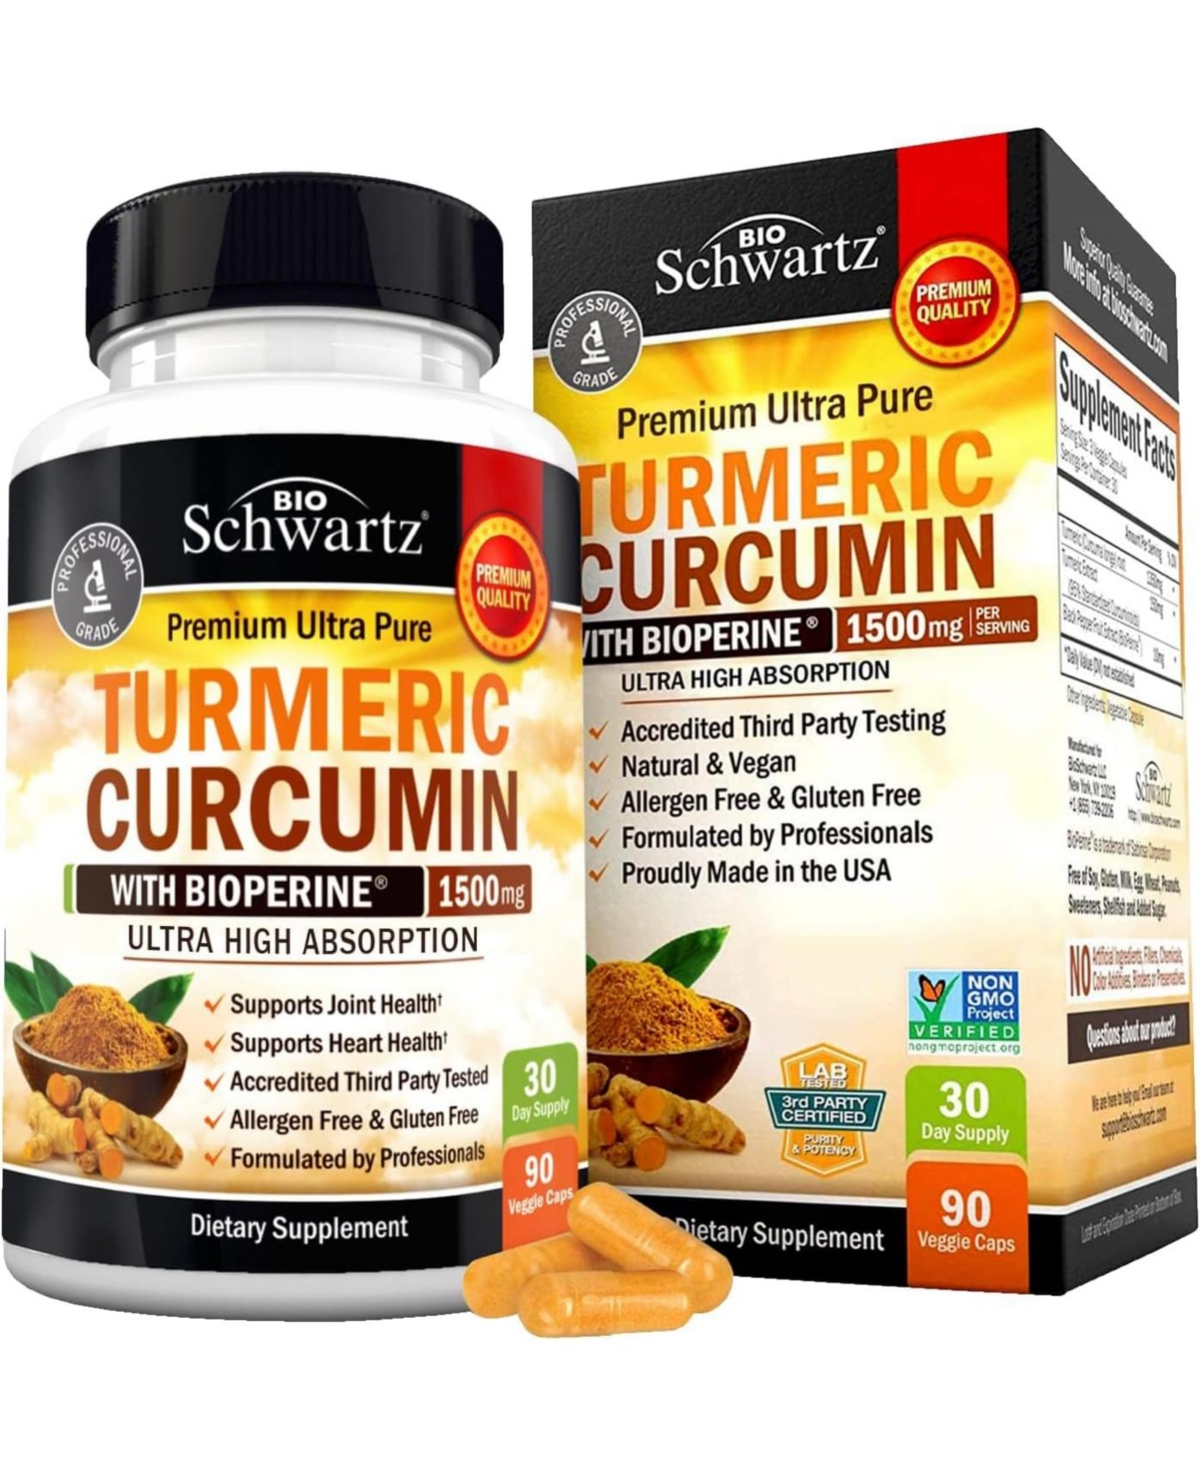 Turmeric Curcumin with BioPerine 1500mg - Natural Joint Support with 95% Standardized Curcuminoids & Black Pepper Extract for Ultra High A